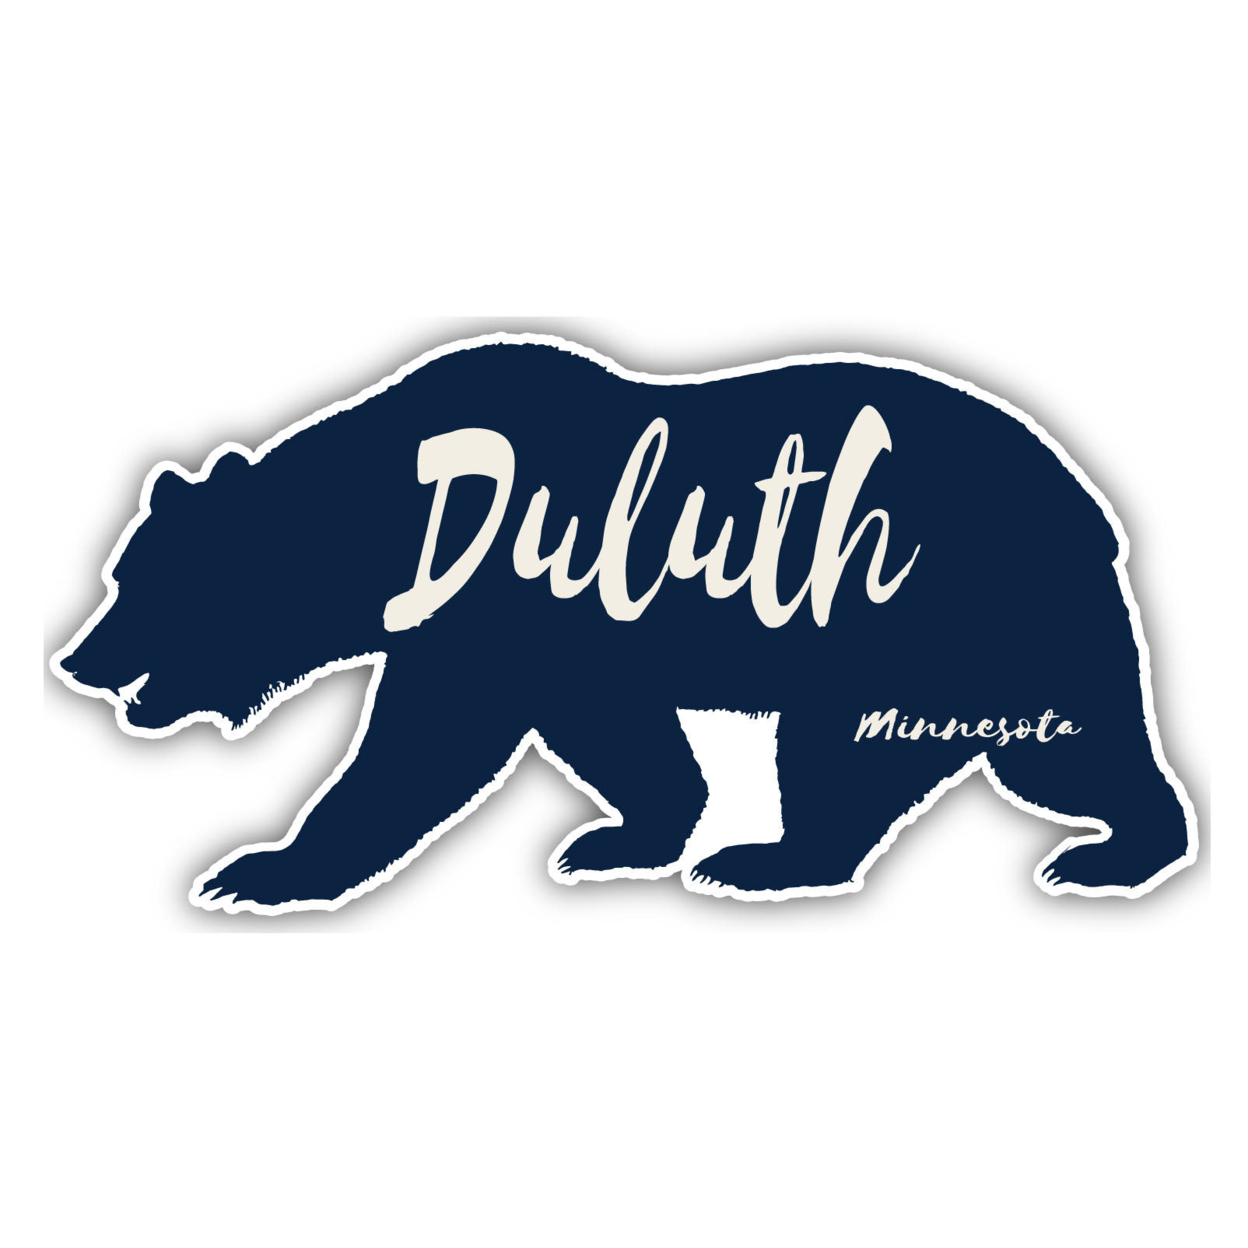 Duluth Minnesota Souvenir Decorative Stickers (Choose Theme And Size) - 4-Pack, 4-Inch, Tent